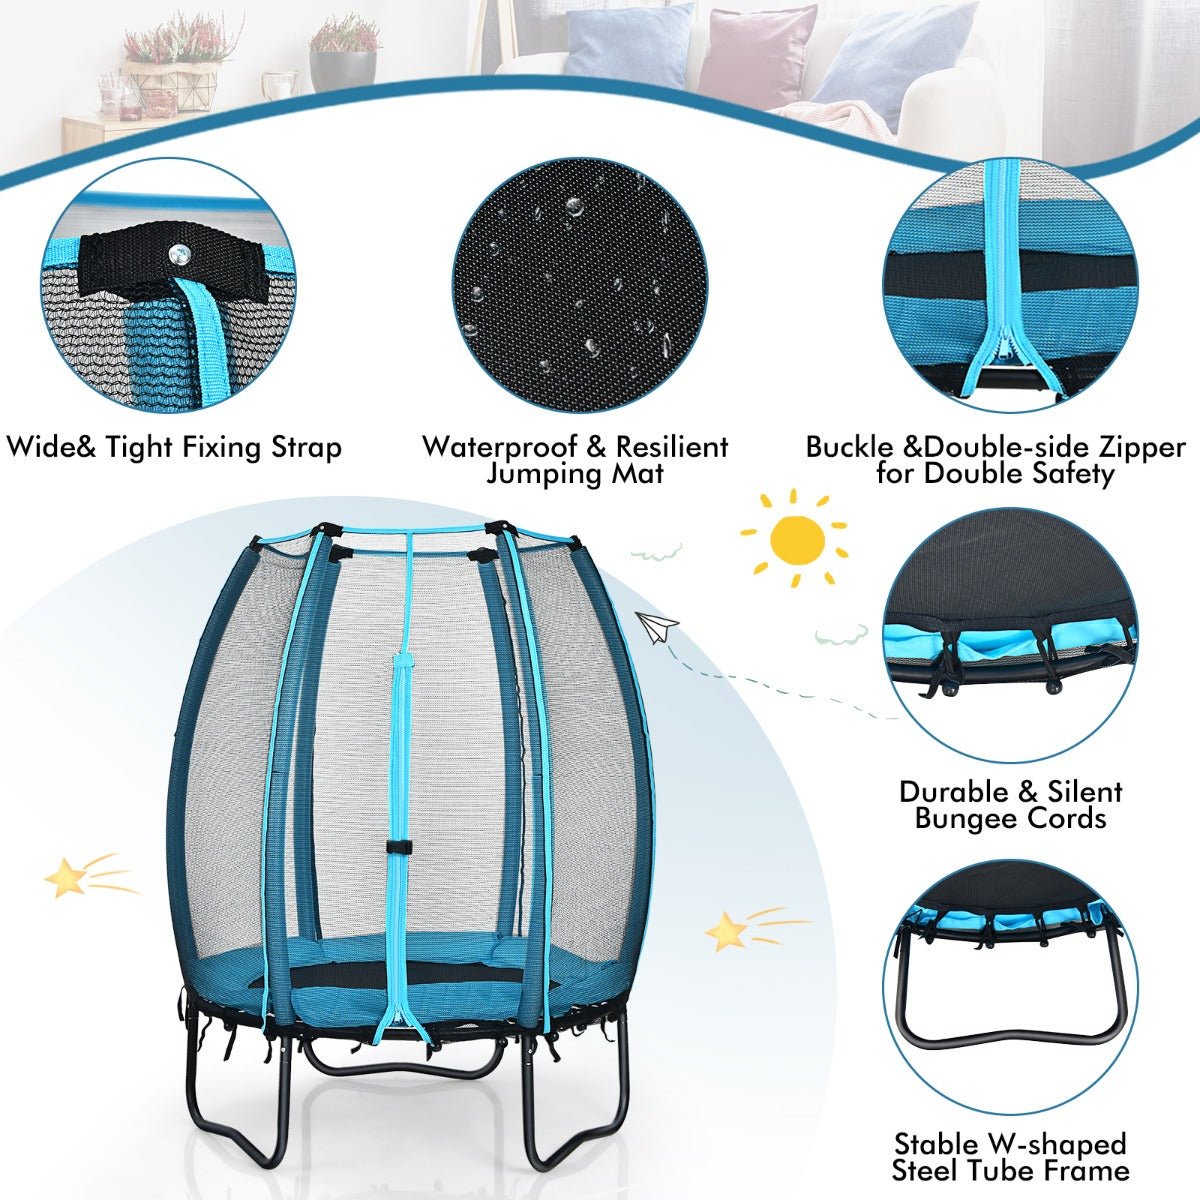 Active Kids: 42 Inches Trampoline with Enclosure Net and Safety Pad